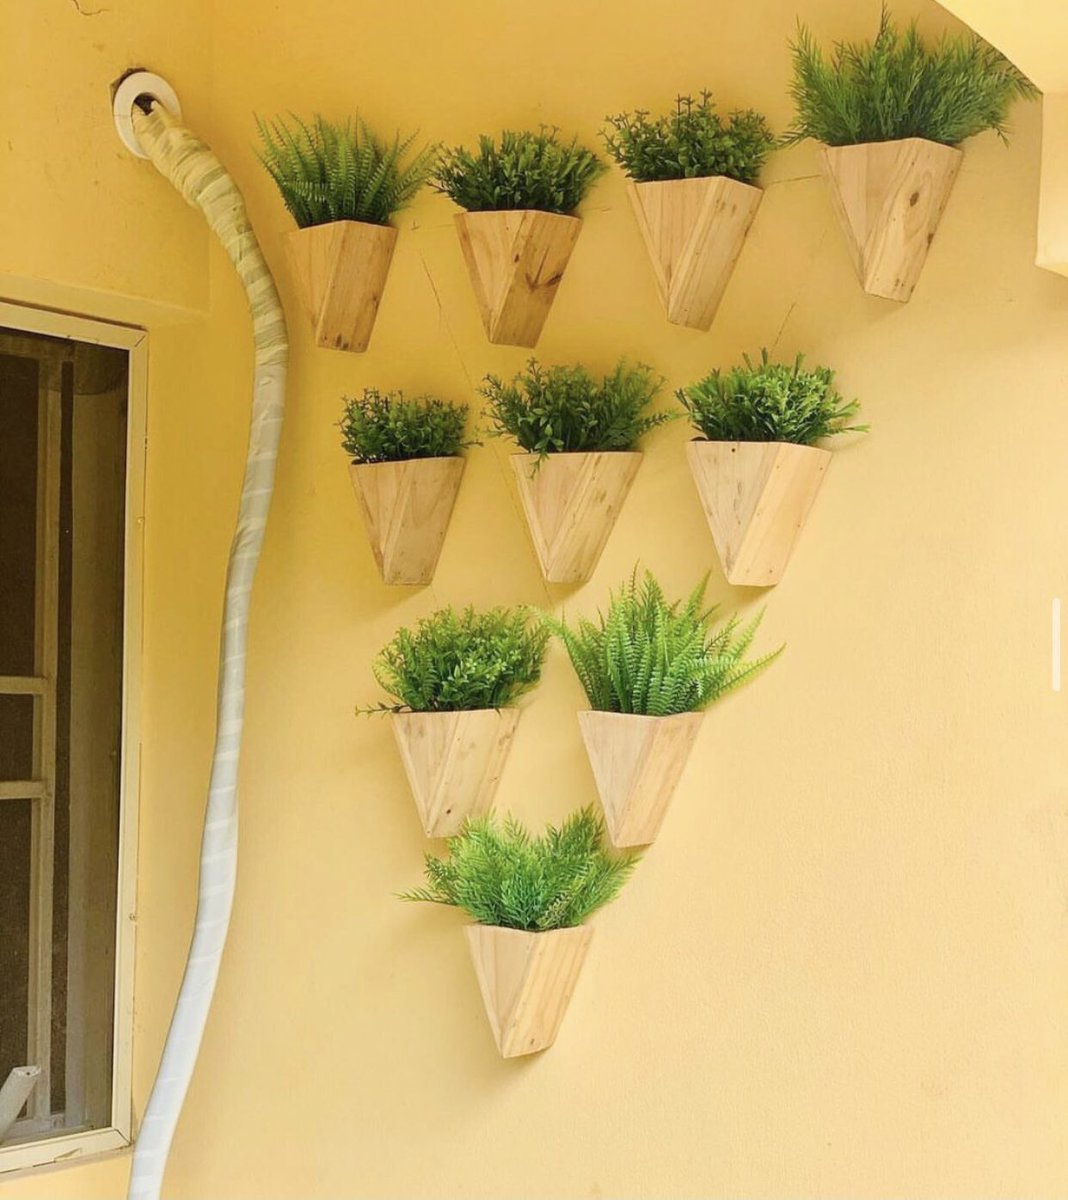 Multi-purpose triangle shaped wooden vase with artificial flowers 
Comes with a hook for hanging behind
Price: 4,000 each

Colors available: Black & Oak

#wood
#Explore
#planters
#plantlover
#lekkiwives
#lagosflorist
#Lagoshomes
#lagosinteriors
#artificialplants
#Woodenplanter